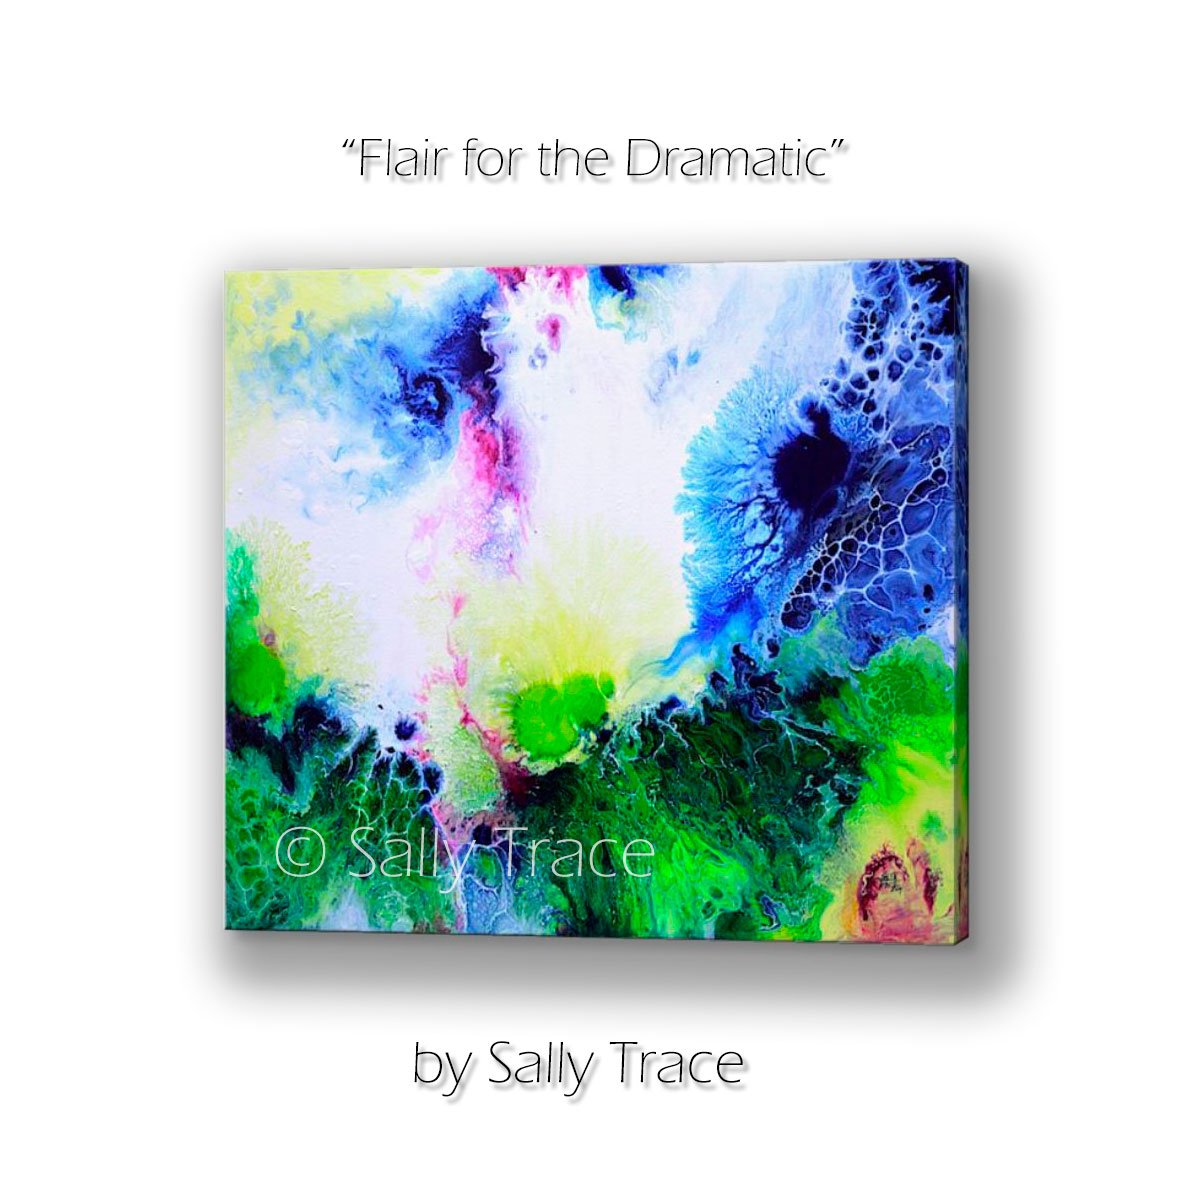 Flair for the Dramatic, fluid art pour painting giclee print on canvas by Sally Trace